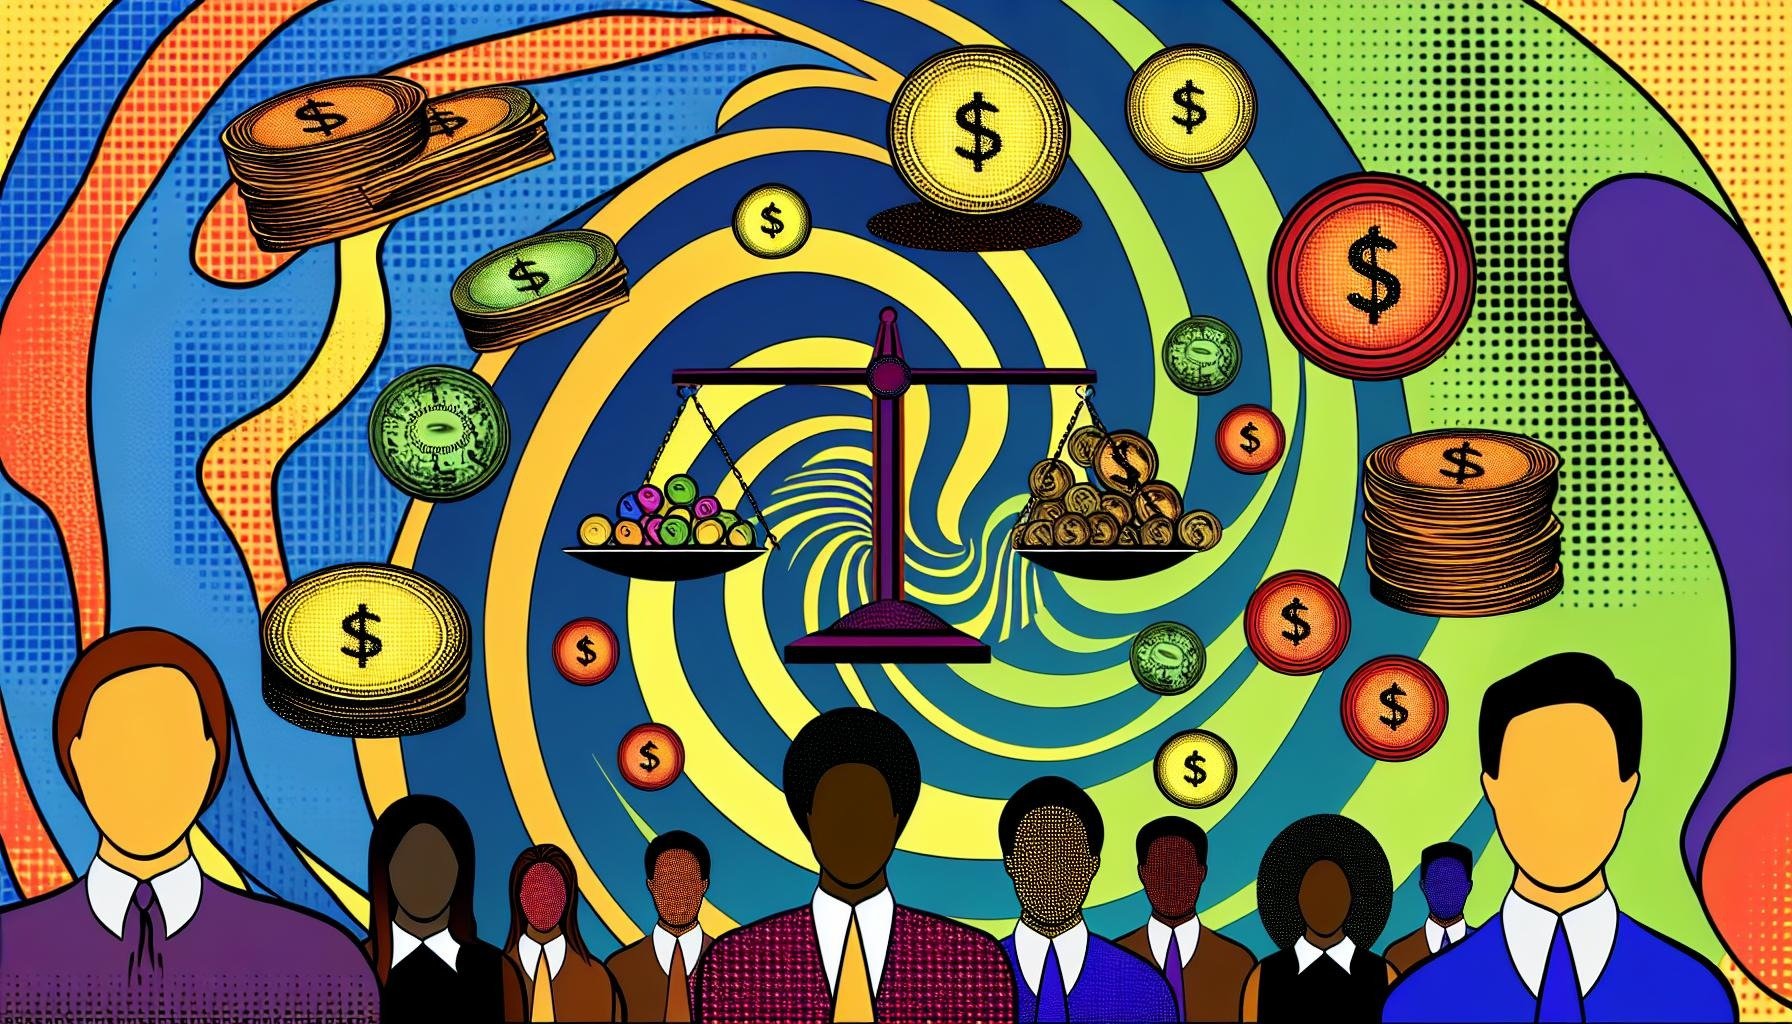 Graphic of people with money and scale floating overhead